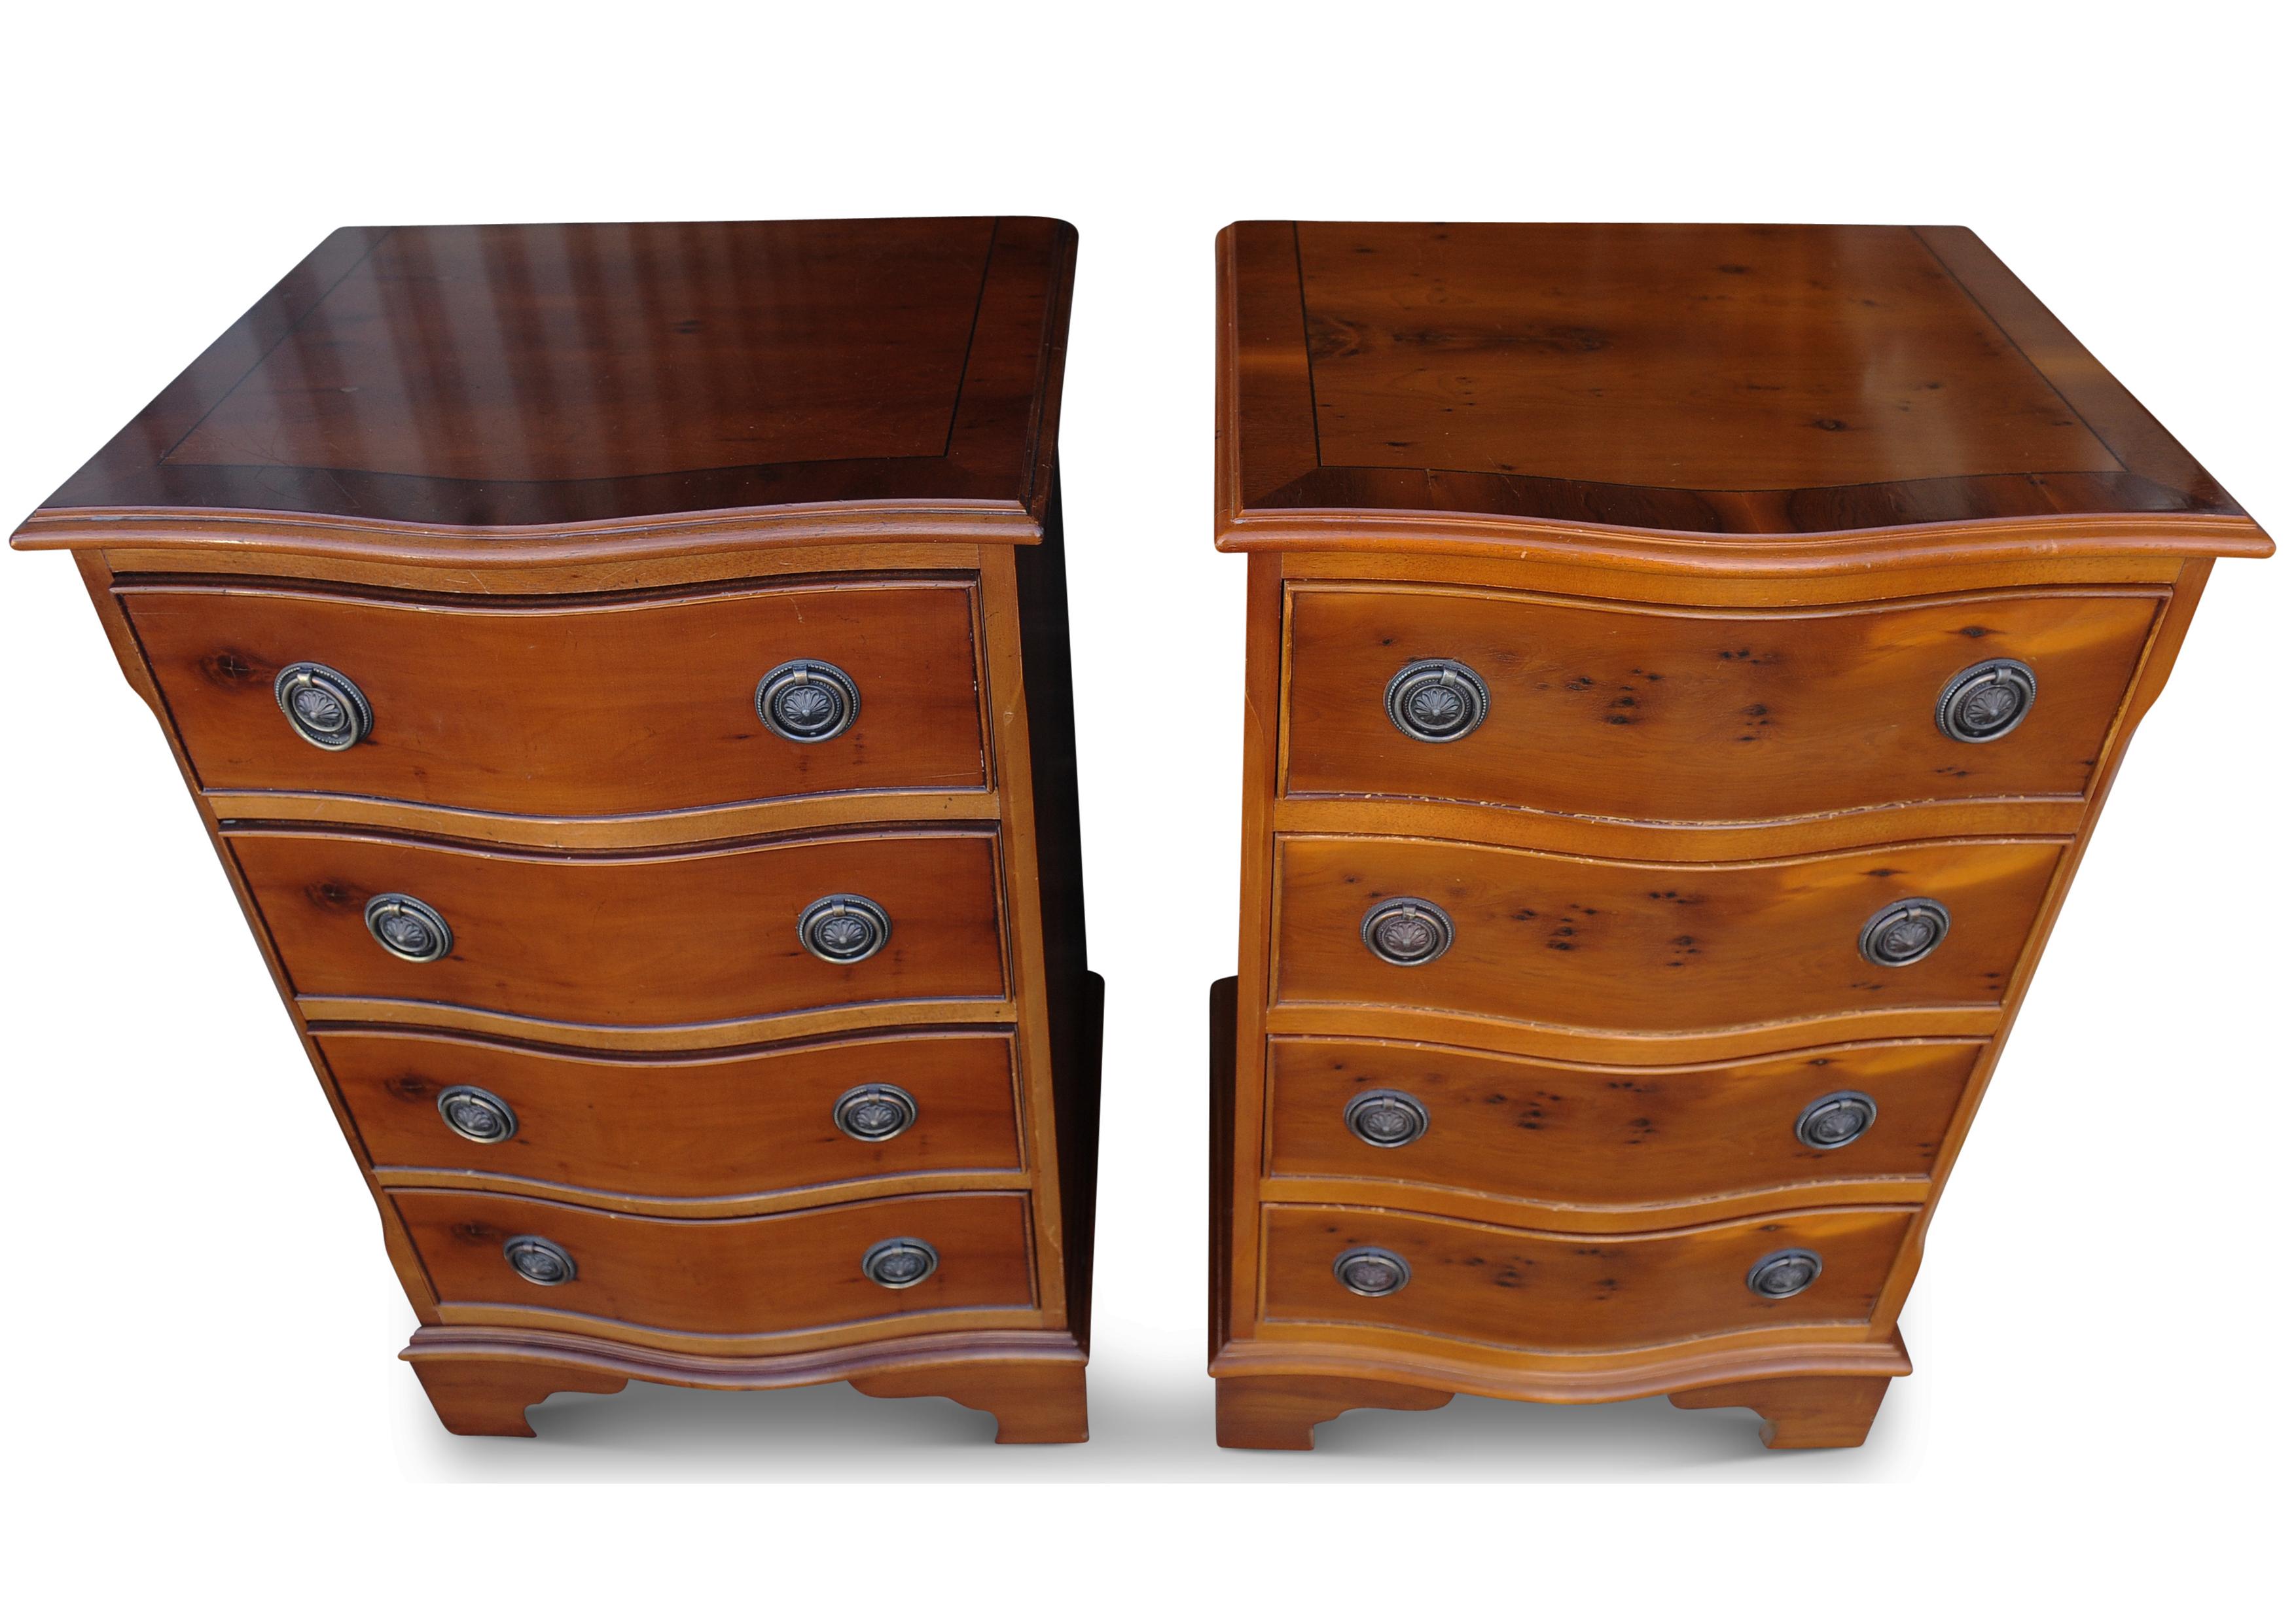 Pair of Yew Wood Serpentine Front Four Drawer Bedside Cabinets In Good Condition For Sale In High Wycombe, GB